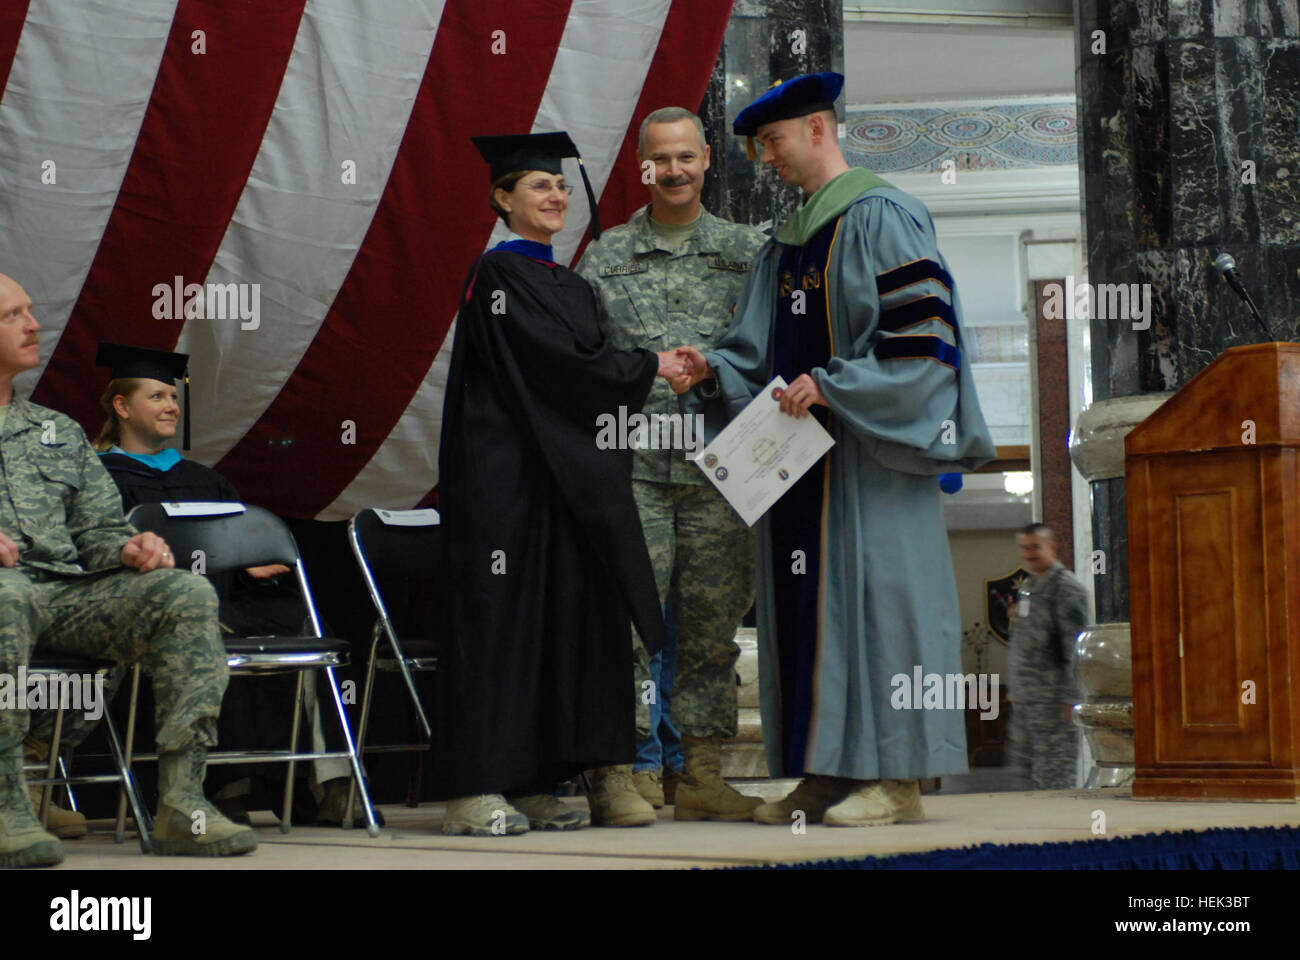 First Lt. John Saindon Jr. (right), medical operations and environmental officer with the 13th Sustainment Command (Expeditionary), and a San Antonio native, receives a Nova Southeastern University doctorate in health science education center certificate May 17 from Brig. Gen. Donald J. Currier (center), commander of the 49th Military Police Brigade, and Carolyn L. Baker (left), chief of continuing education programs, Office of the Secretary of Defense, at Al Faw Palace at Camp Liberty, Iraq. (Photo by: Spc. Britney Bodner) Hard work and humility, environmental officer thrives in Iraq 286323 Stock Photo